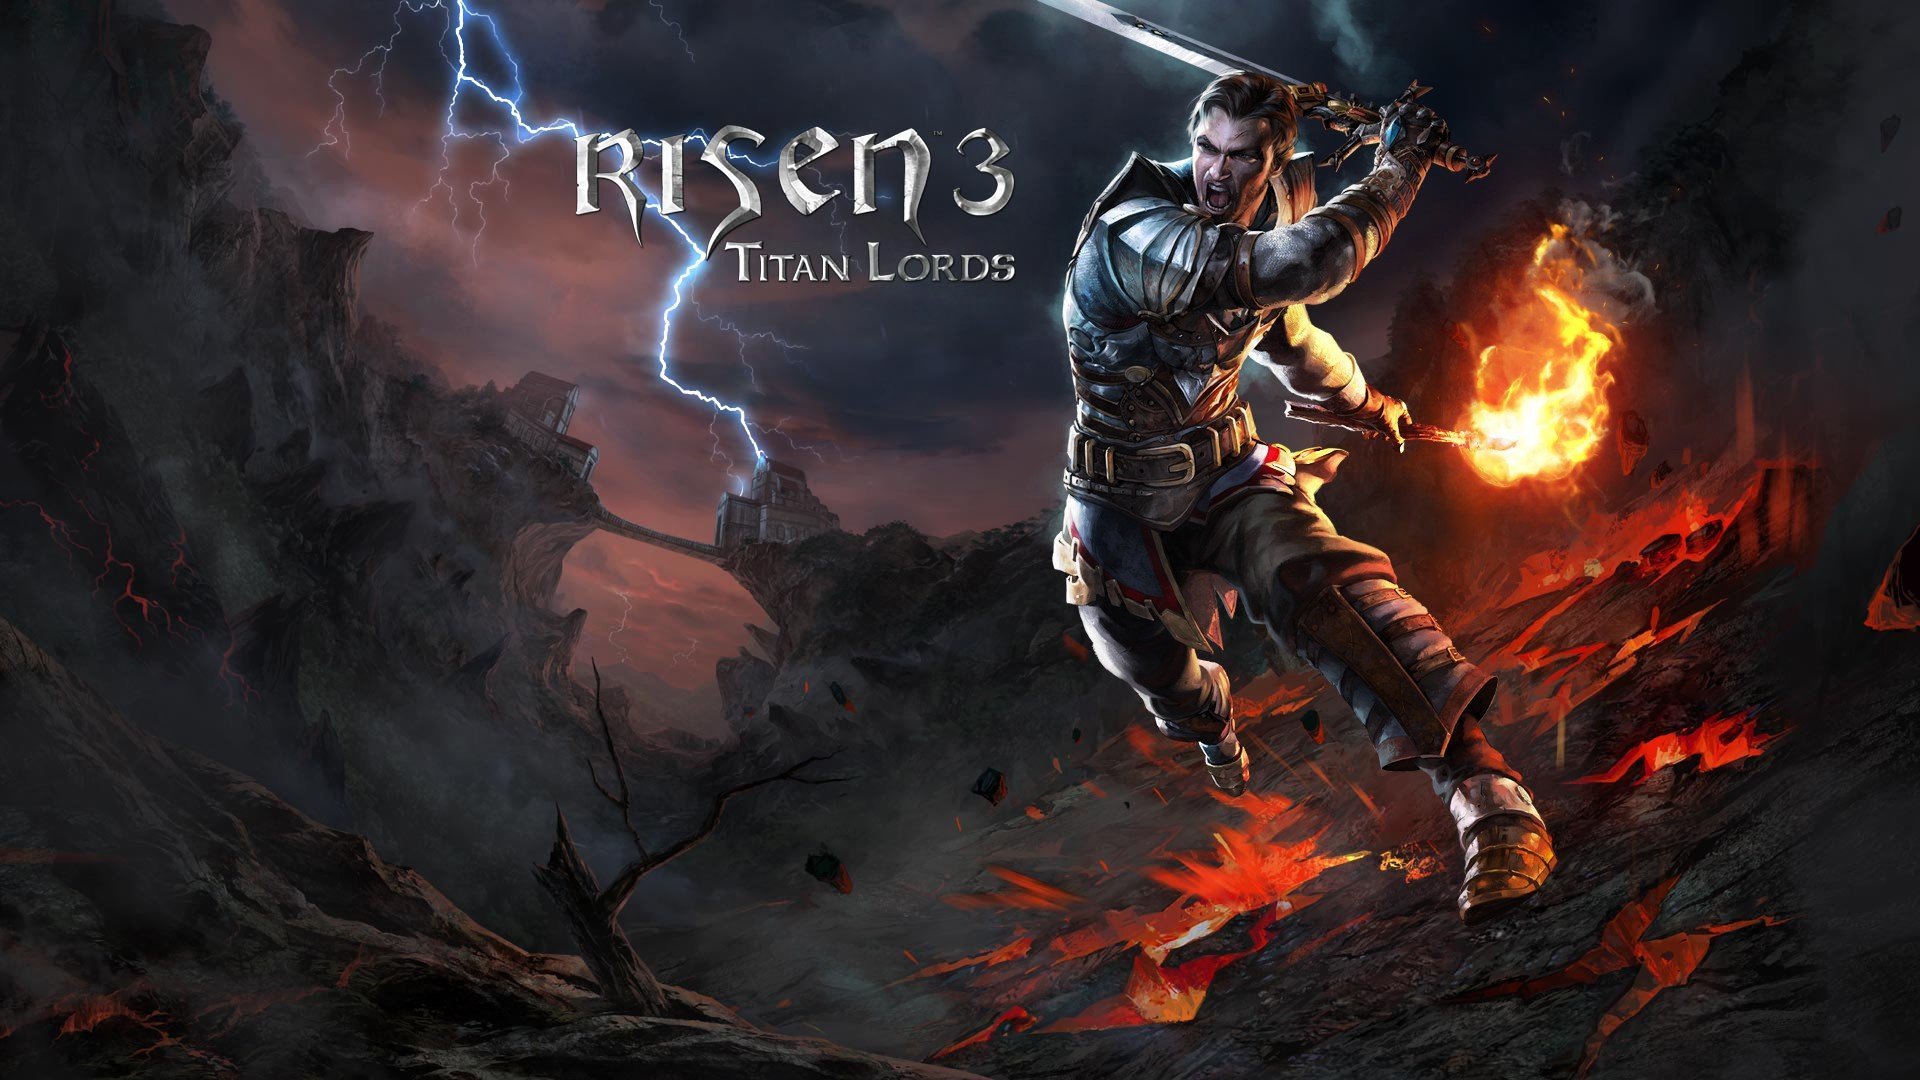 Best Risen 3: Titan Lords wallpaper ID:131260 for High Resolution 1080p PC